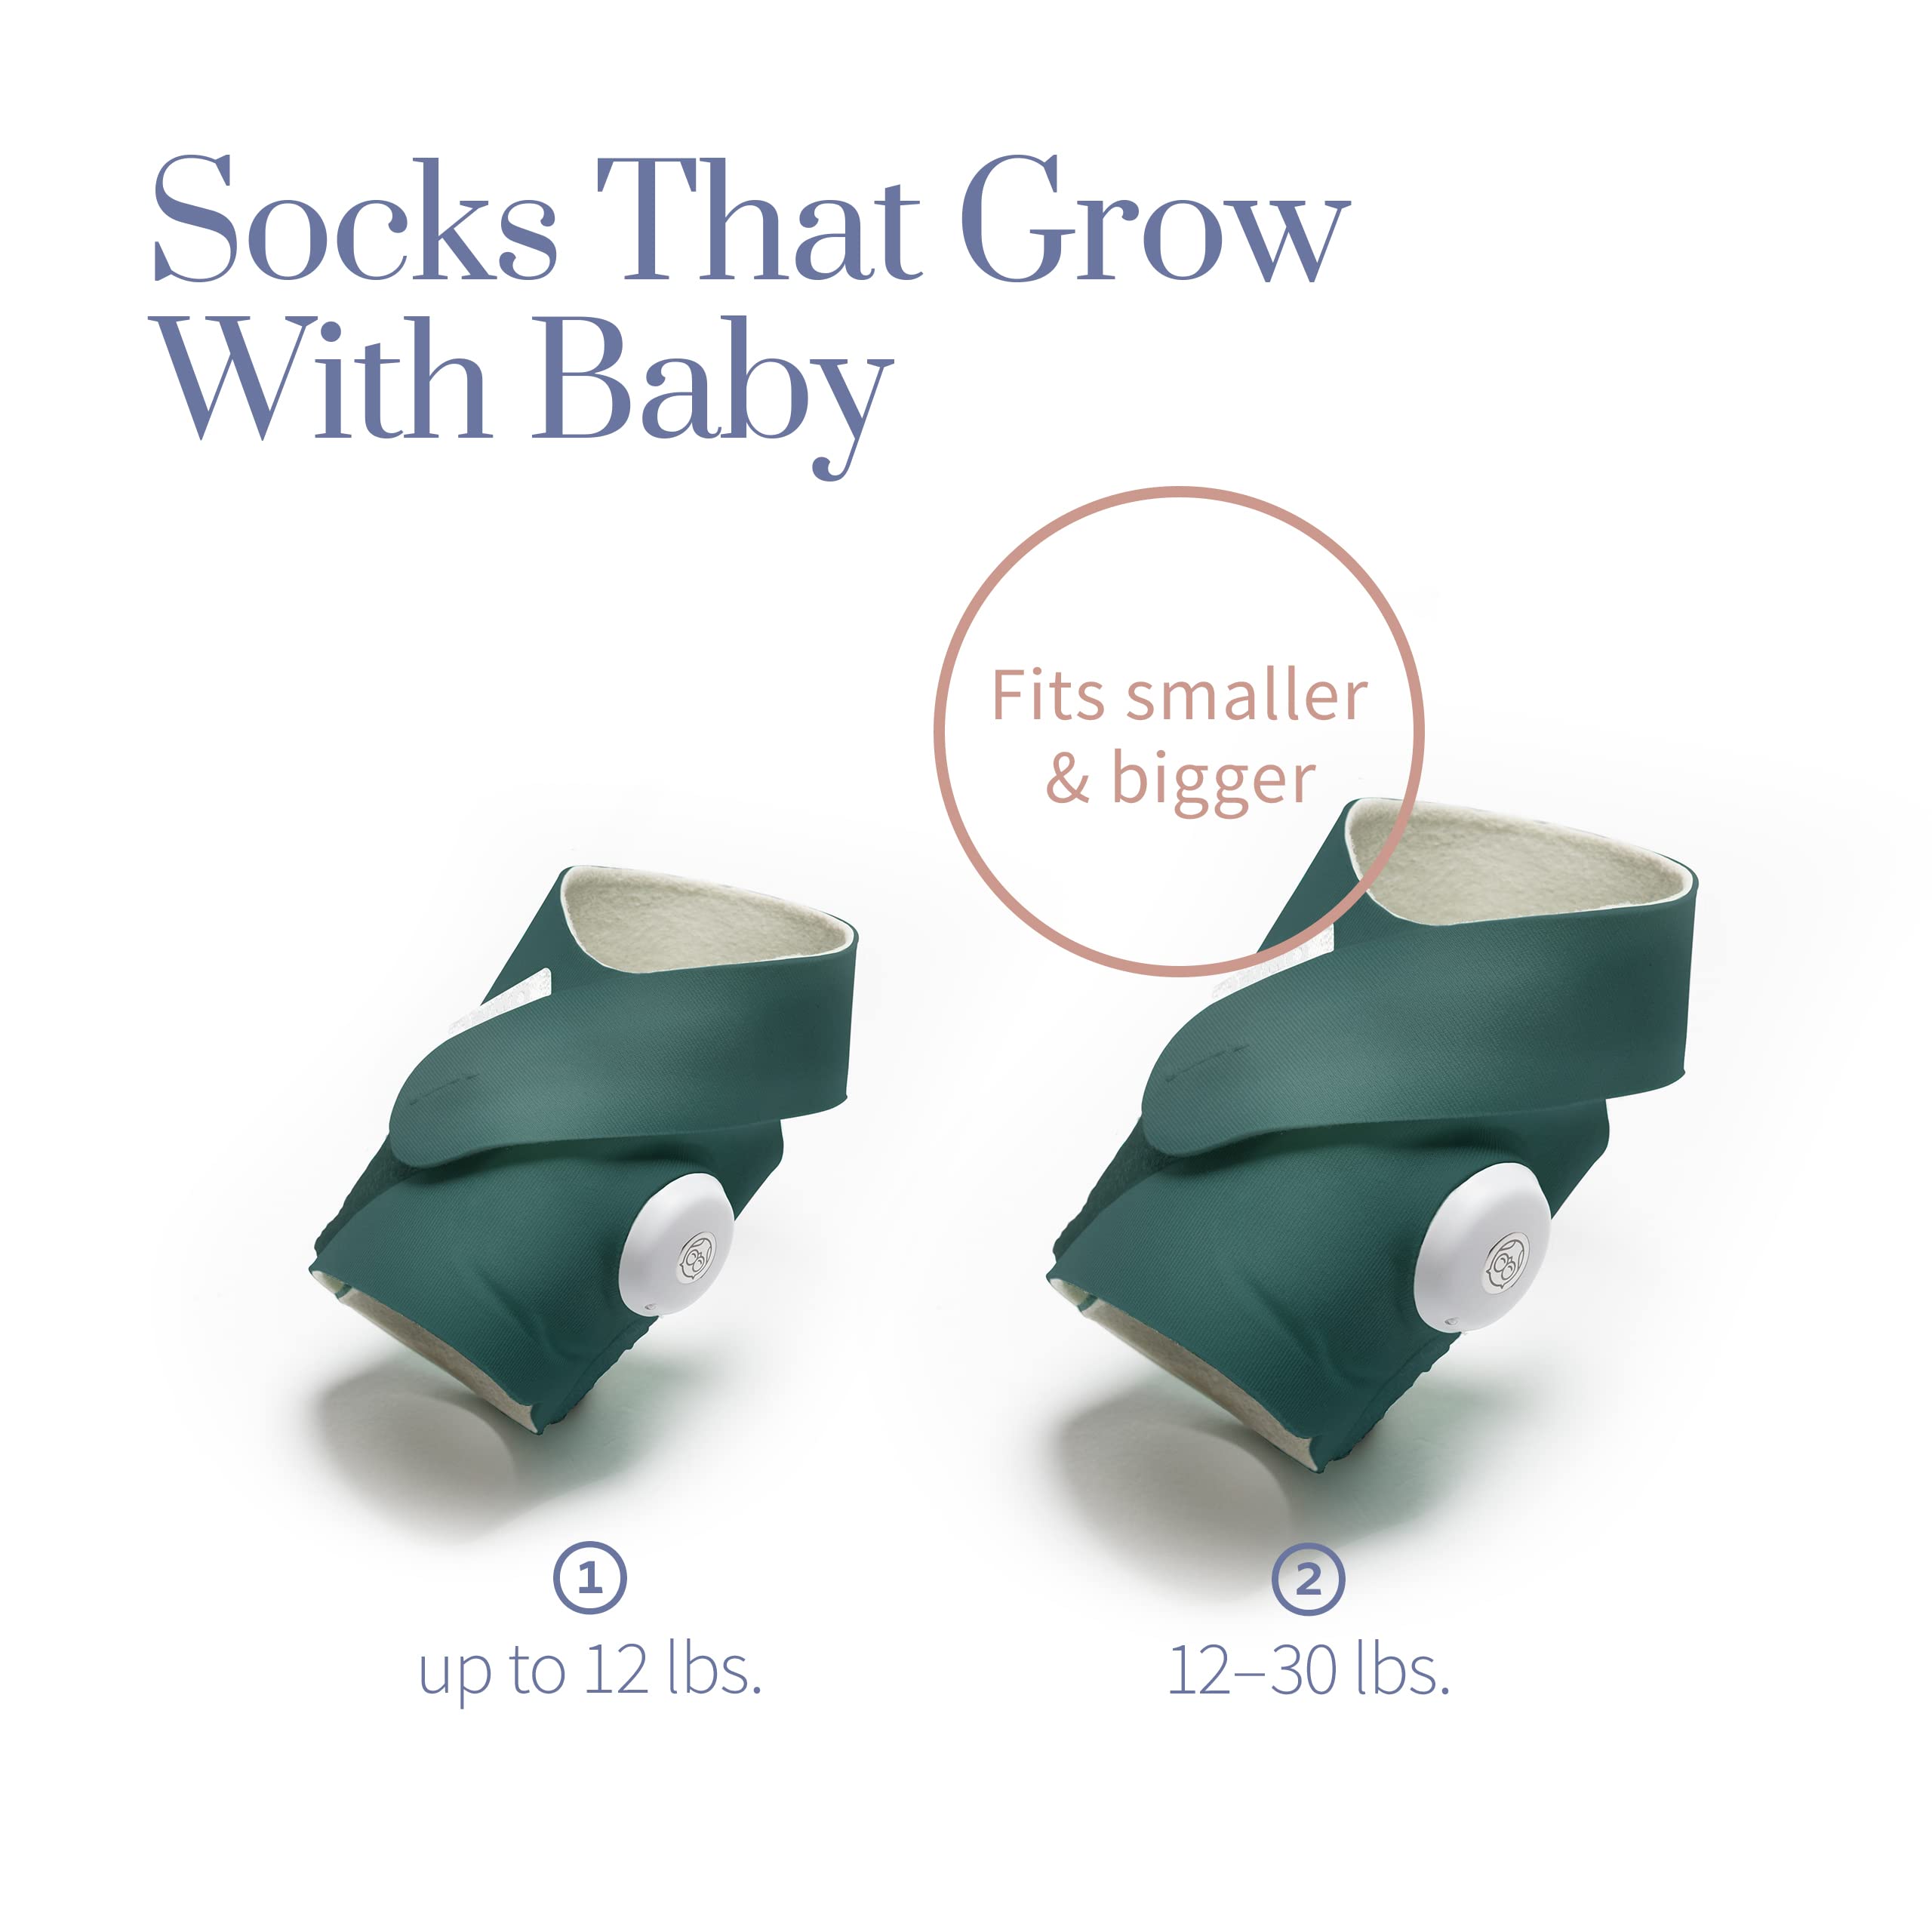 Owlet Dream Duo Smart Baby Monitor - Video Baby Monitor with HD Camera & Dream Sock: Only Baby Monitor to Track Heart Rate & Average Oxygen as Sleep Quality Indicators - Deep Sea Green